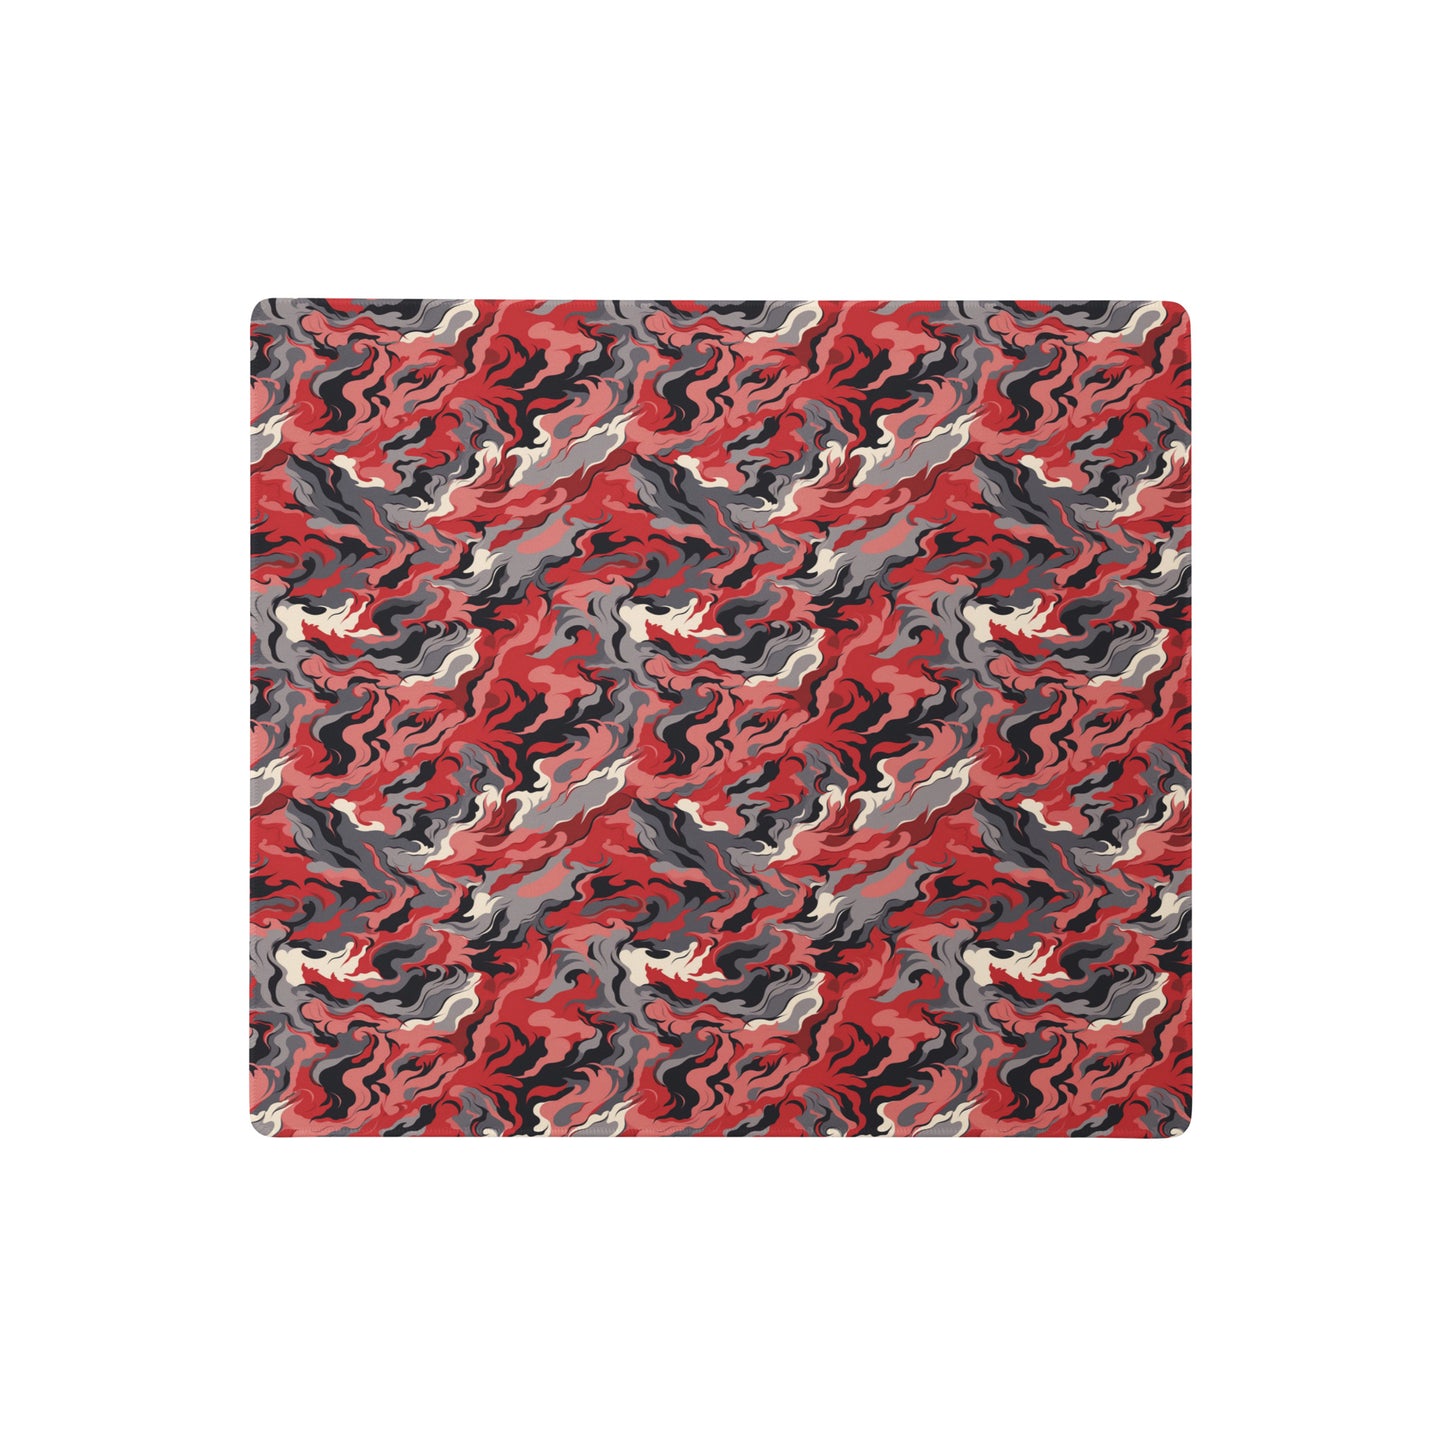 A 18" x 16" desk pad with a grey and red camo pattern.